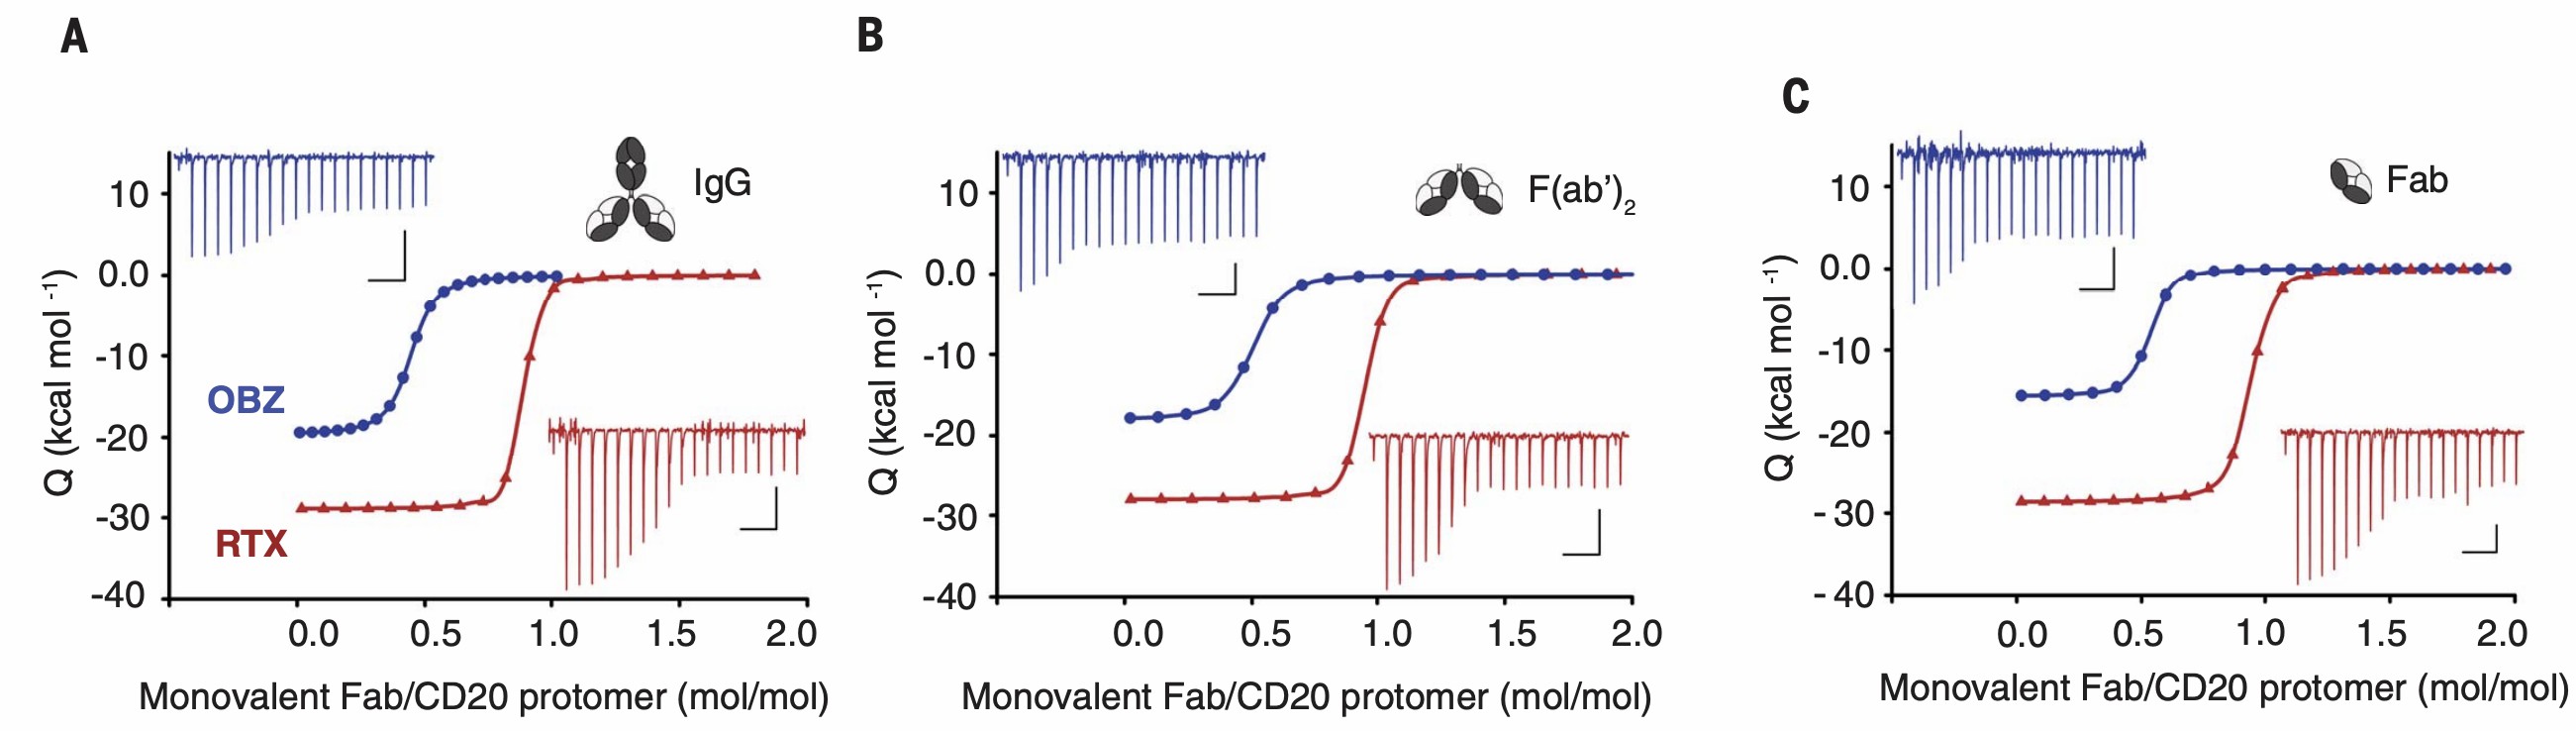 Results of isothermal titrations of IgG and variants F(ab’)2 and Fab antibodies into CD20 proteins. (Kumar, et al., 2020)